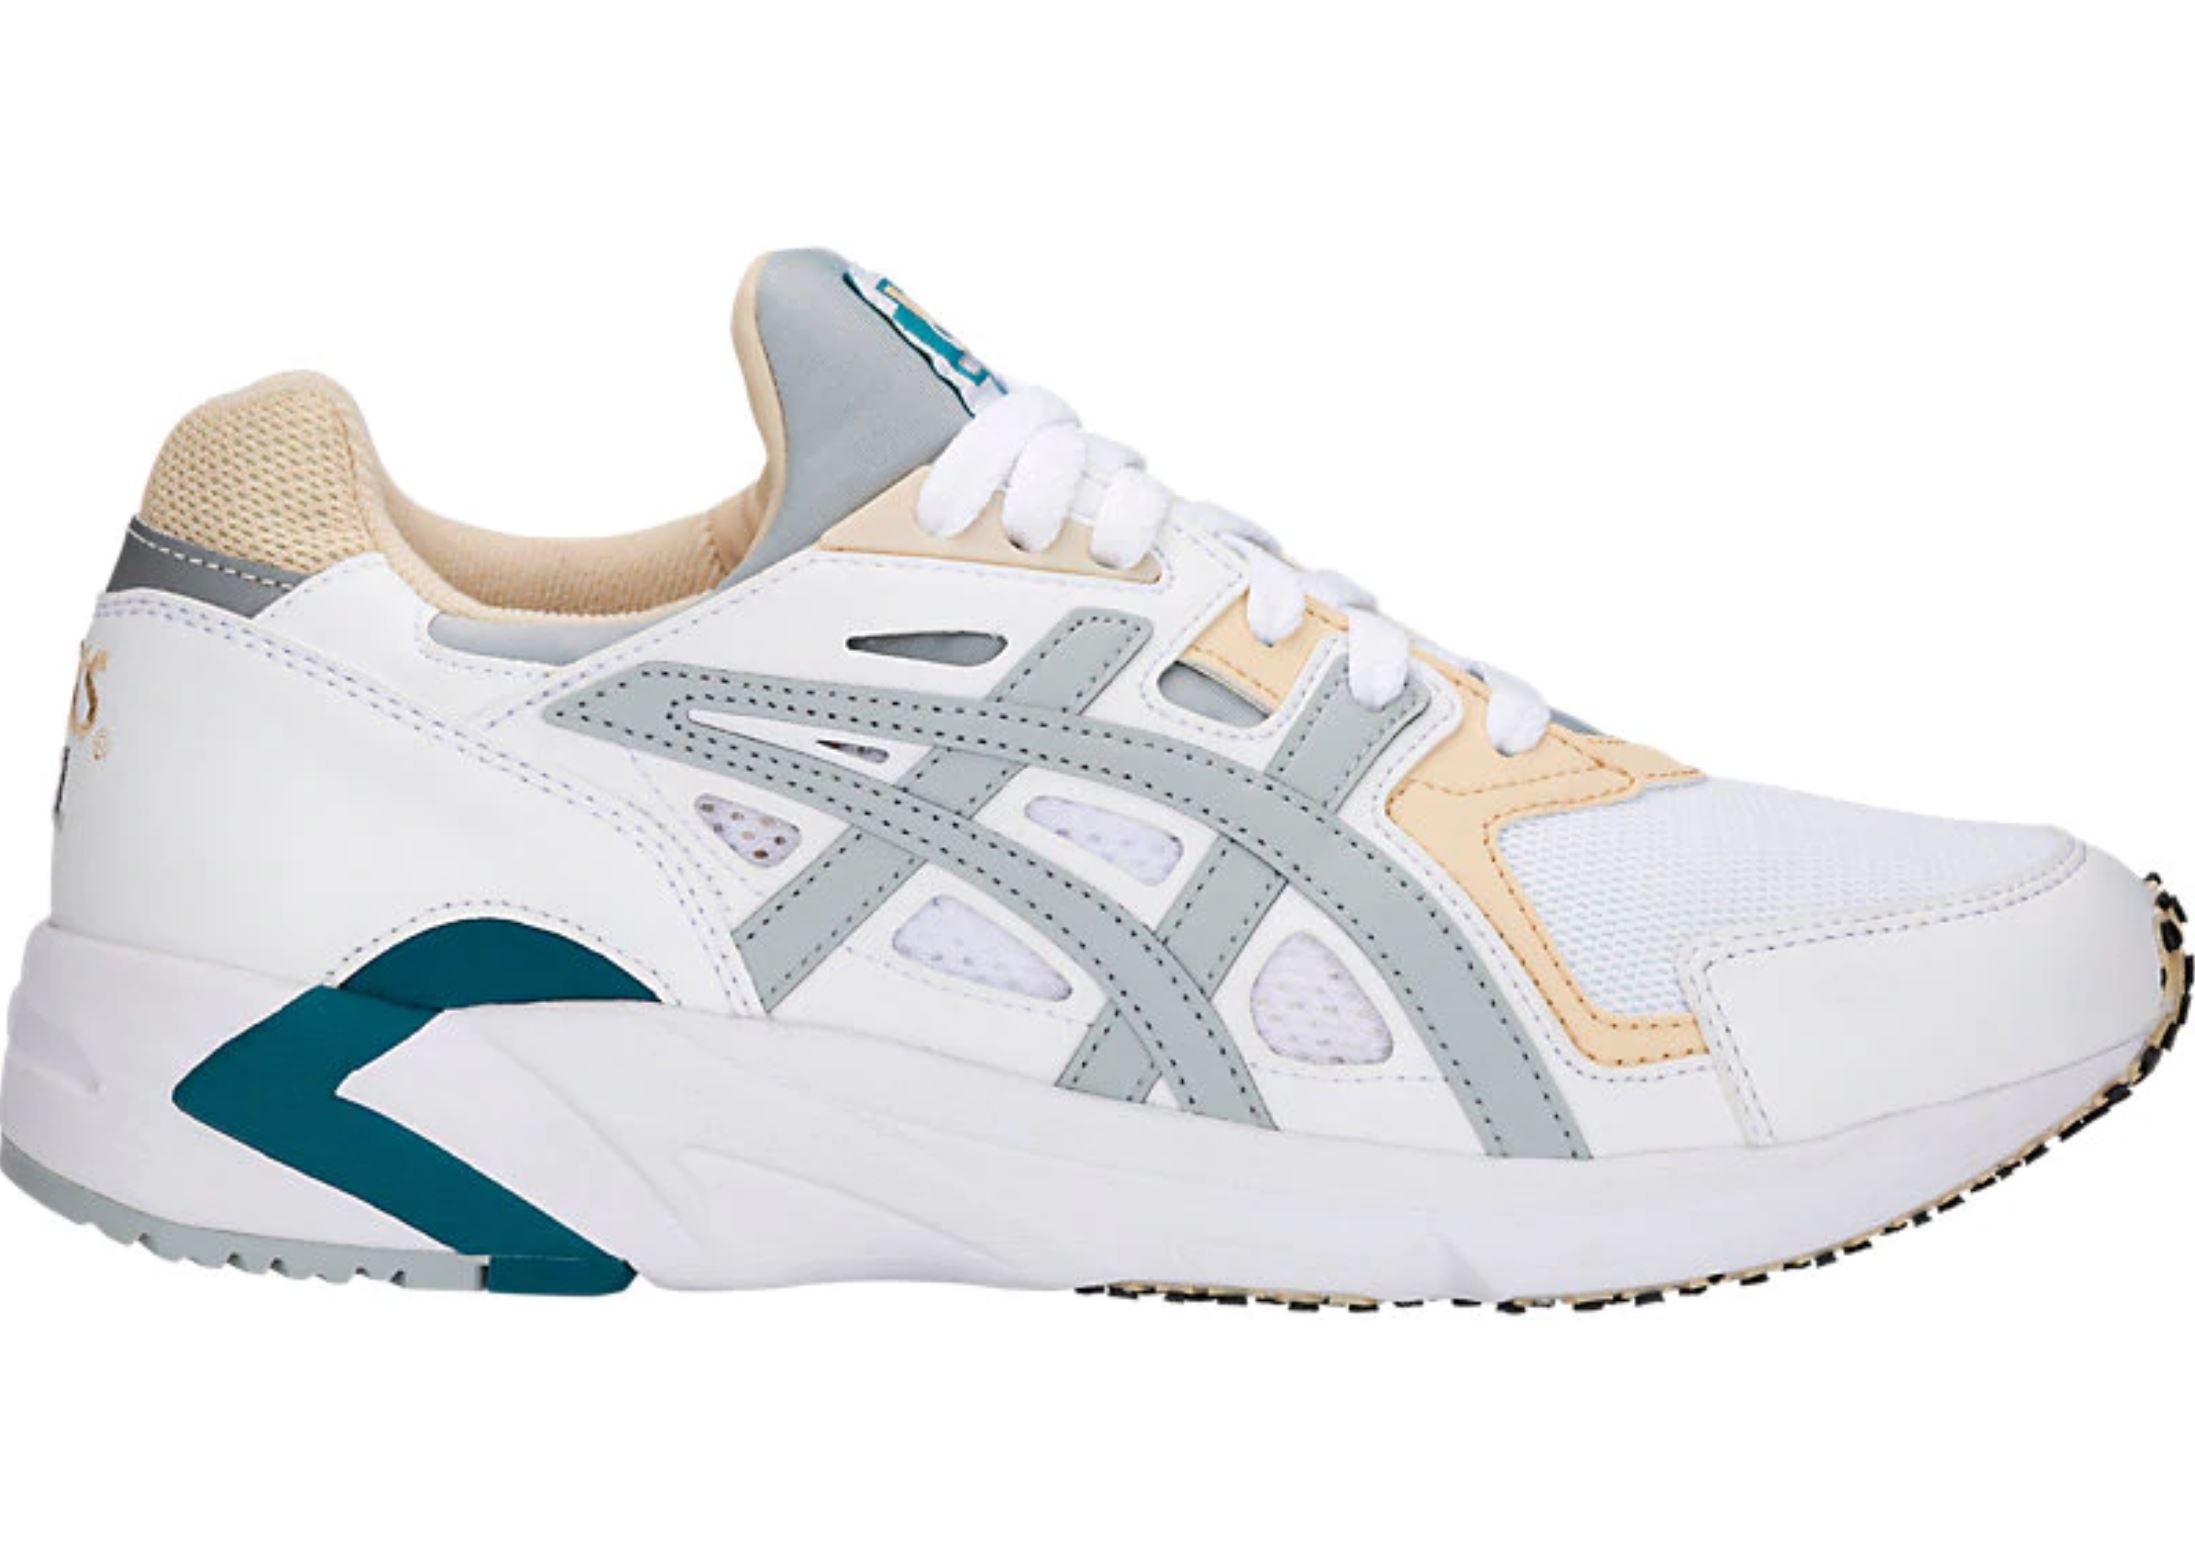 AsicsTiger Has Brought Back the Gel-DS Trainer, a Performance Running ...